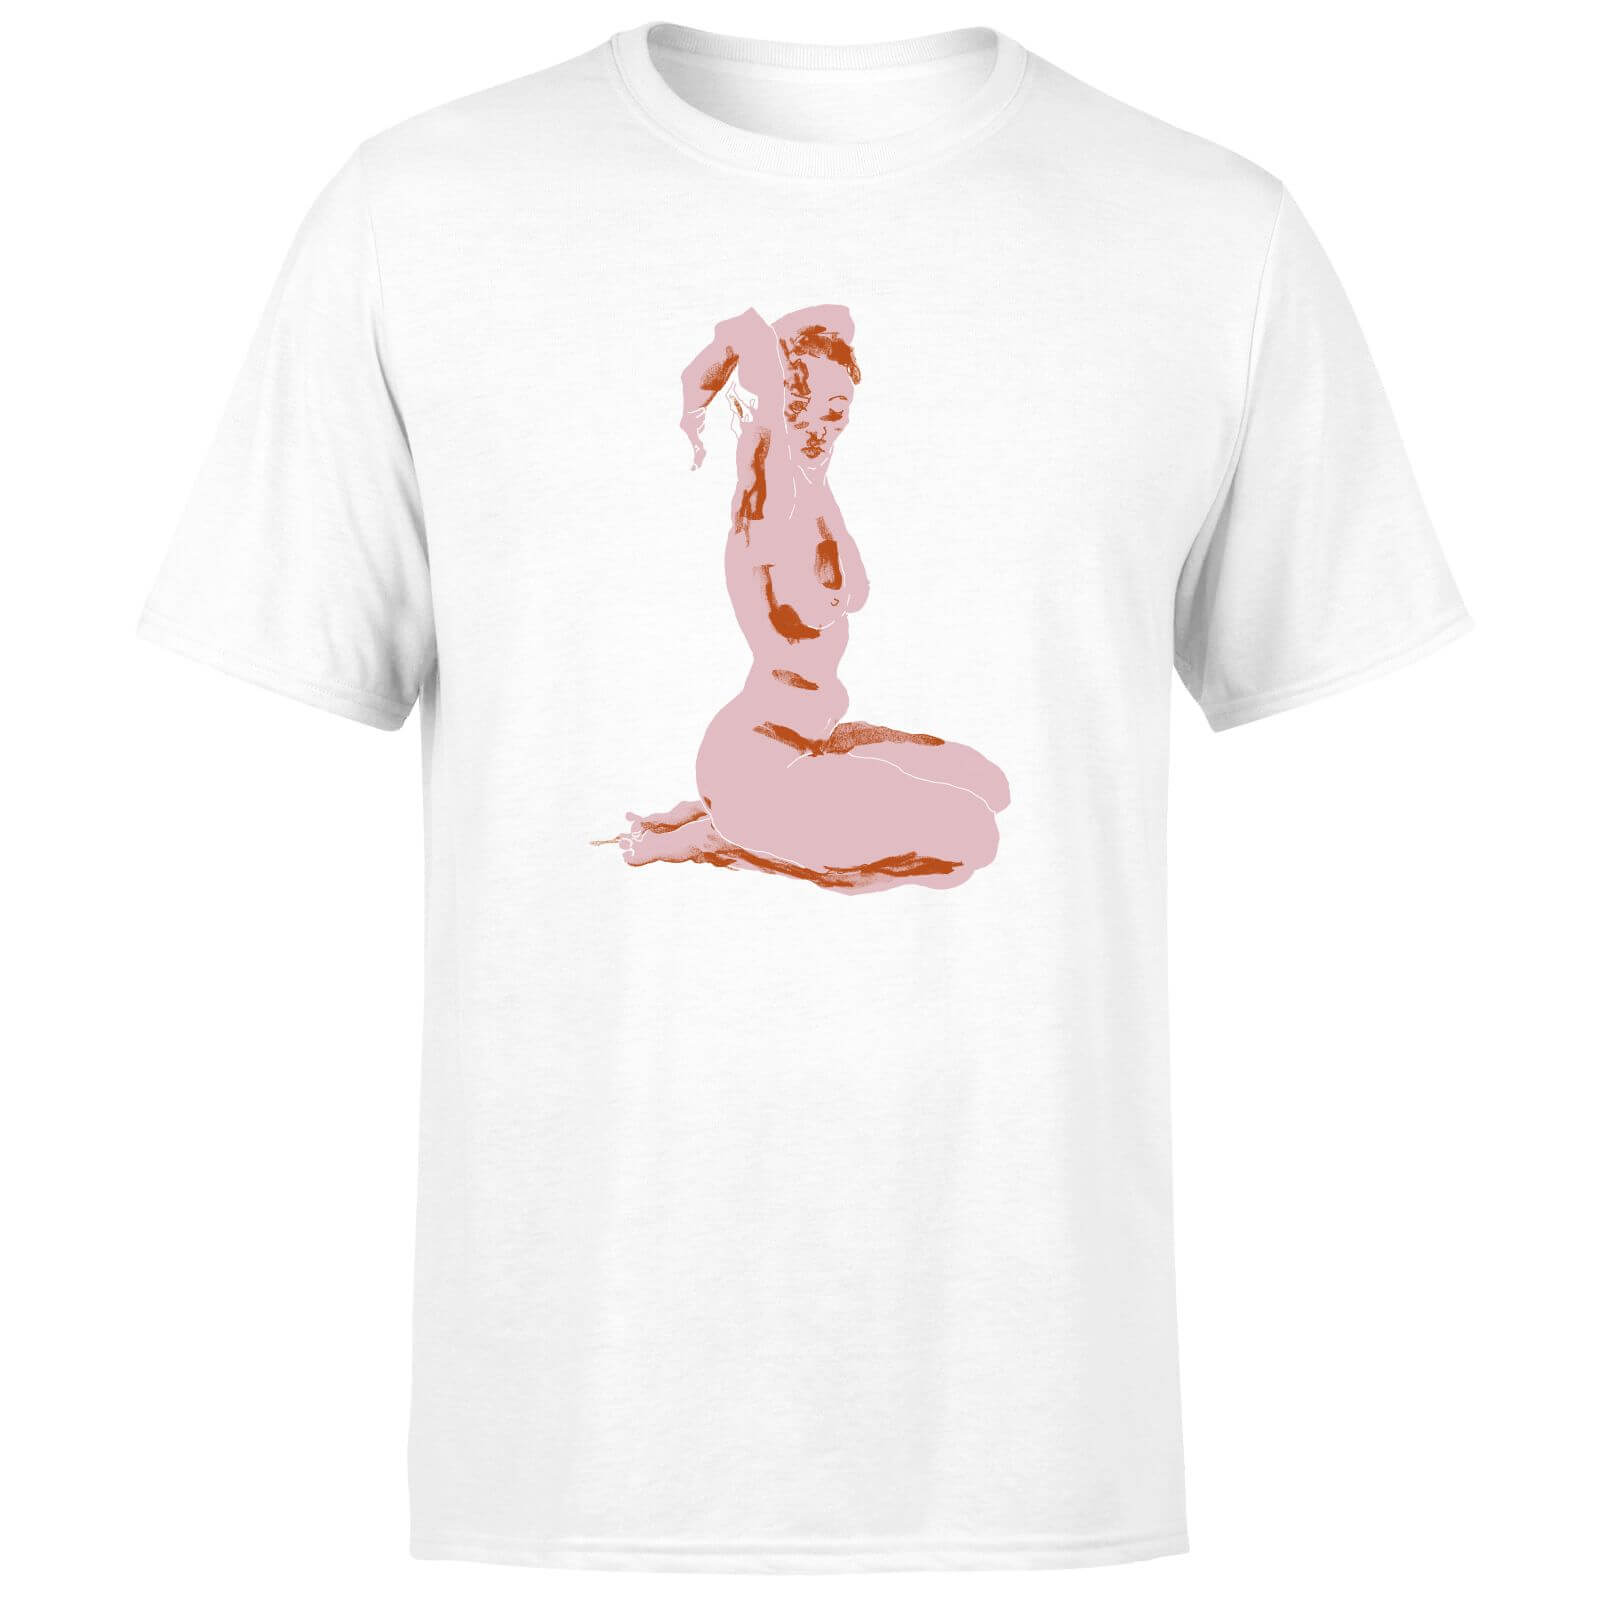 Nude, Arms Folded Over Her Head Men's T-Shirt - White - XS - White